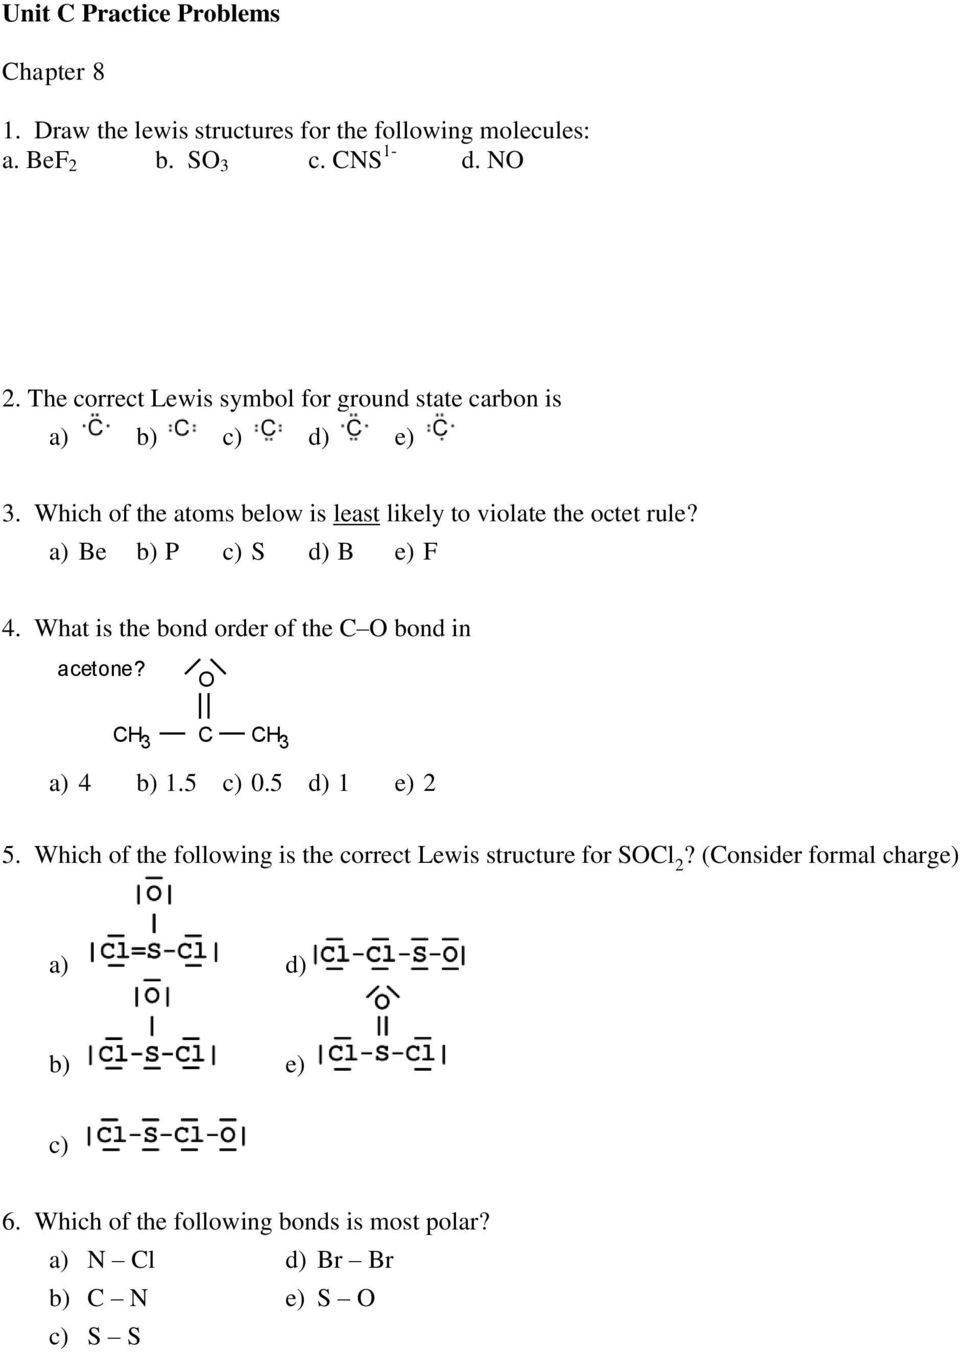 Lewis Structure Practice Worksheet 5 which Of the Following is the Correct Lewis Structure for